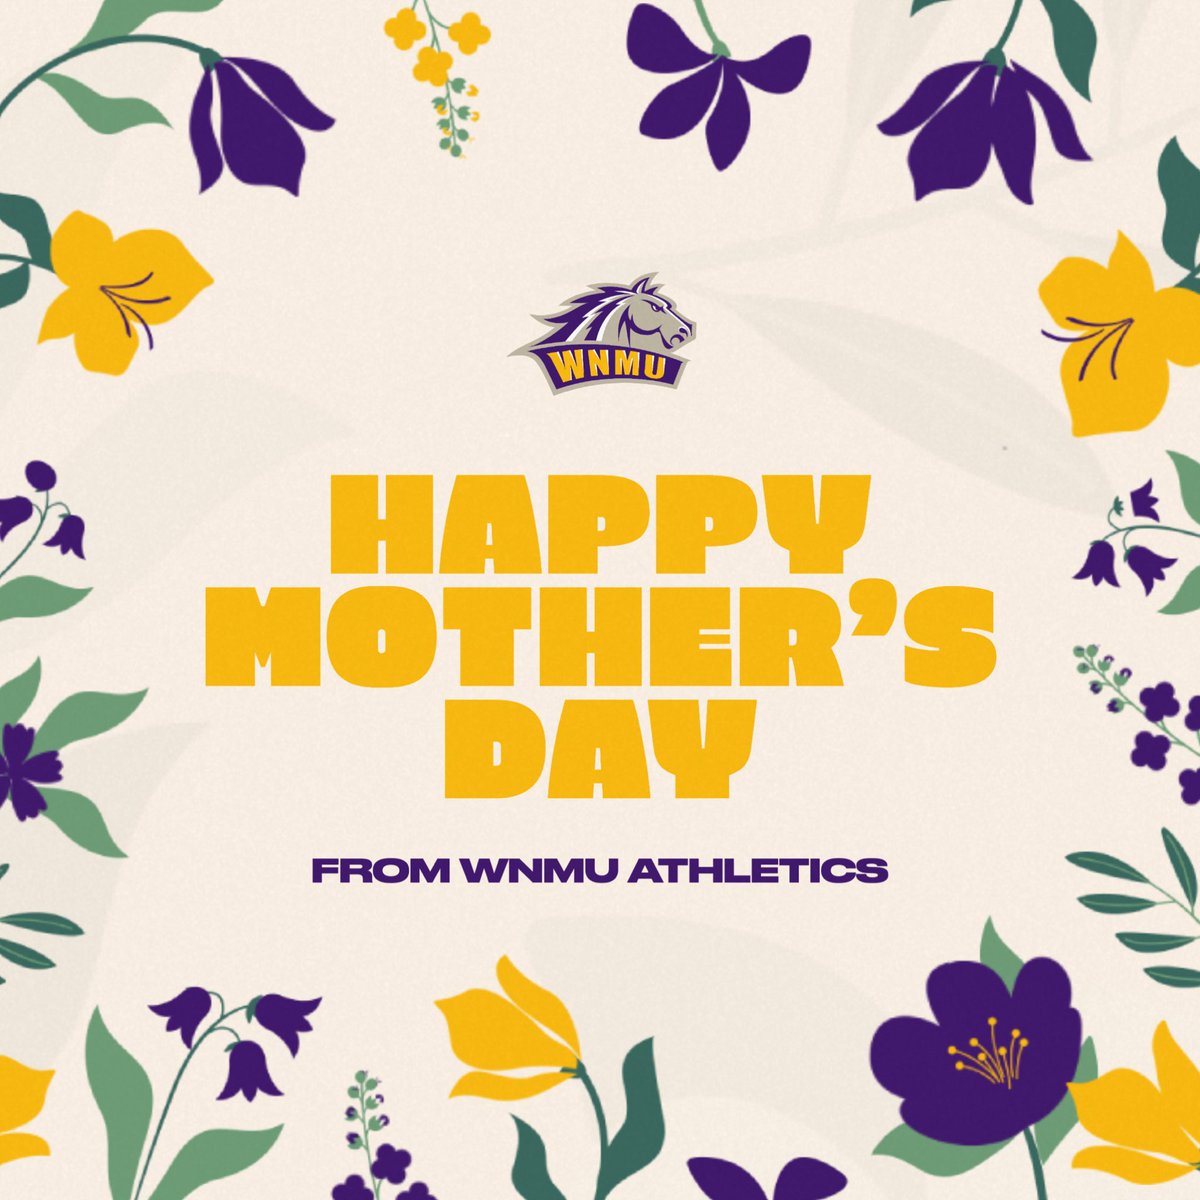 Happy Mother’s Day to all of the Mom’s out there from WNMU Athletics. We appreciate every sacrifice you make. #RareBreed #WNMU